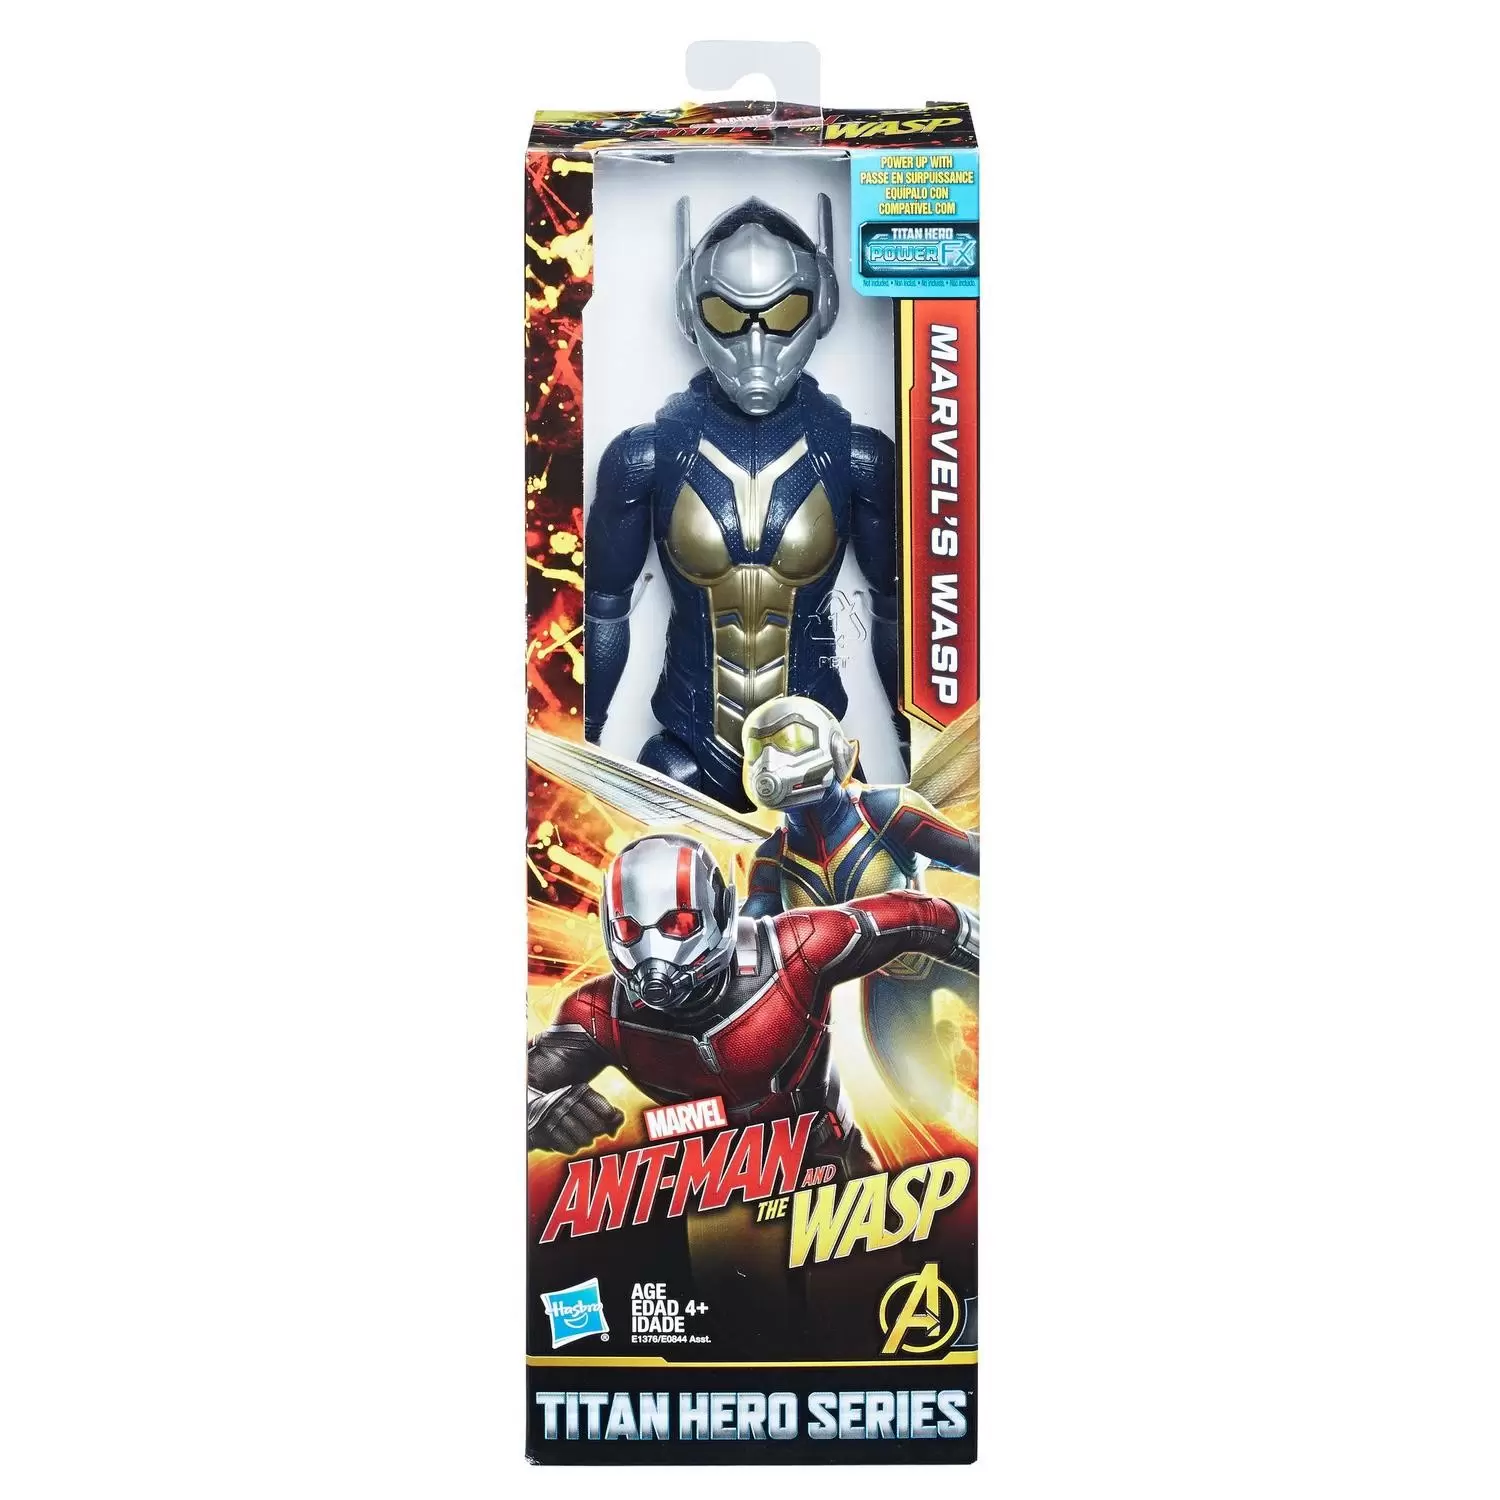 Titan Hero Series - Marvel\'s Wasp Power FX - Ant-Man & The Wasp